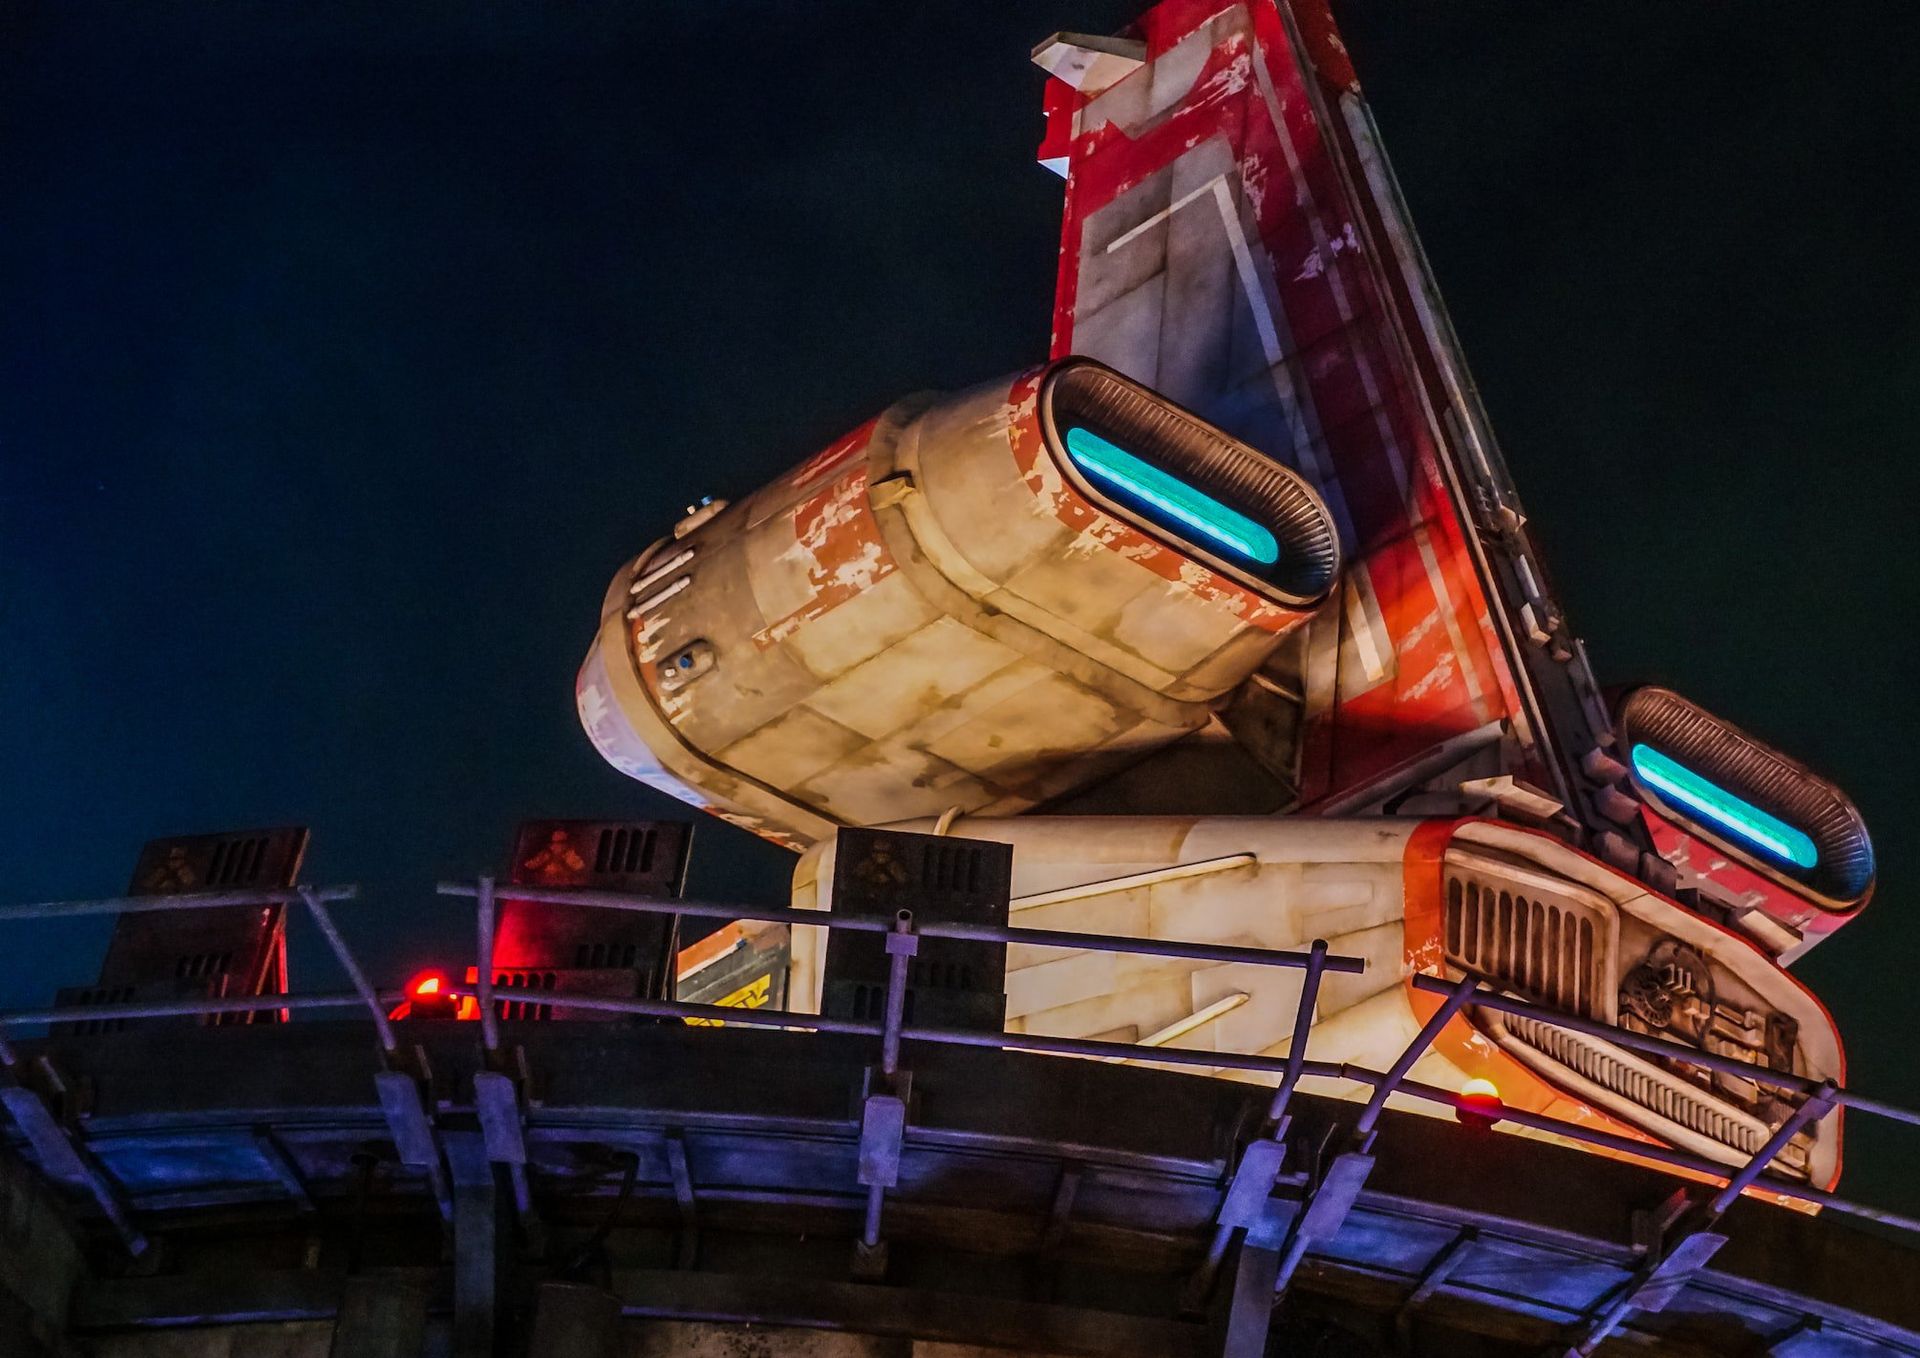 a futuristic spacecraft sits on a landing pad at night, guided by a glowing orange light